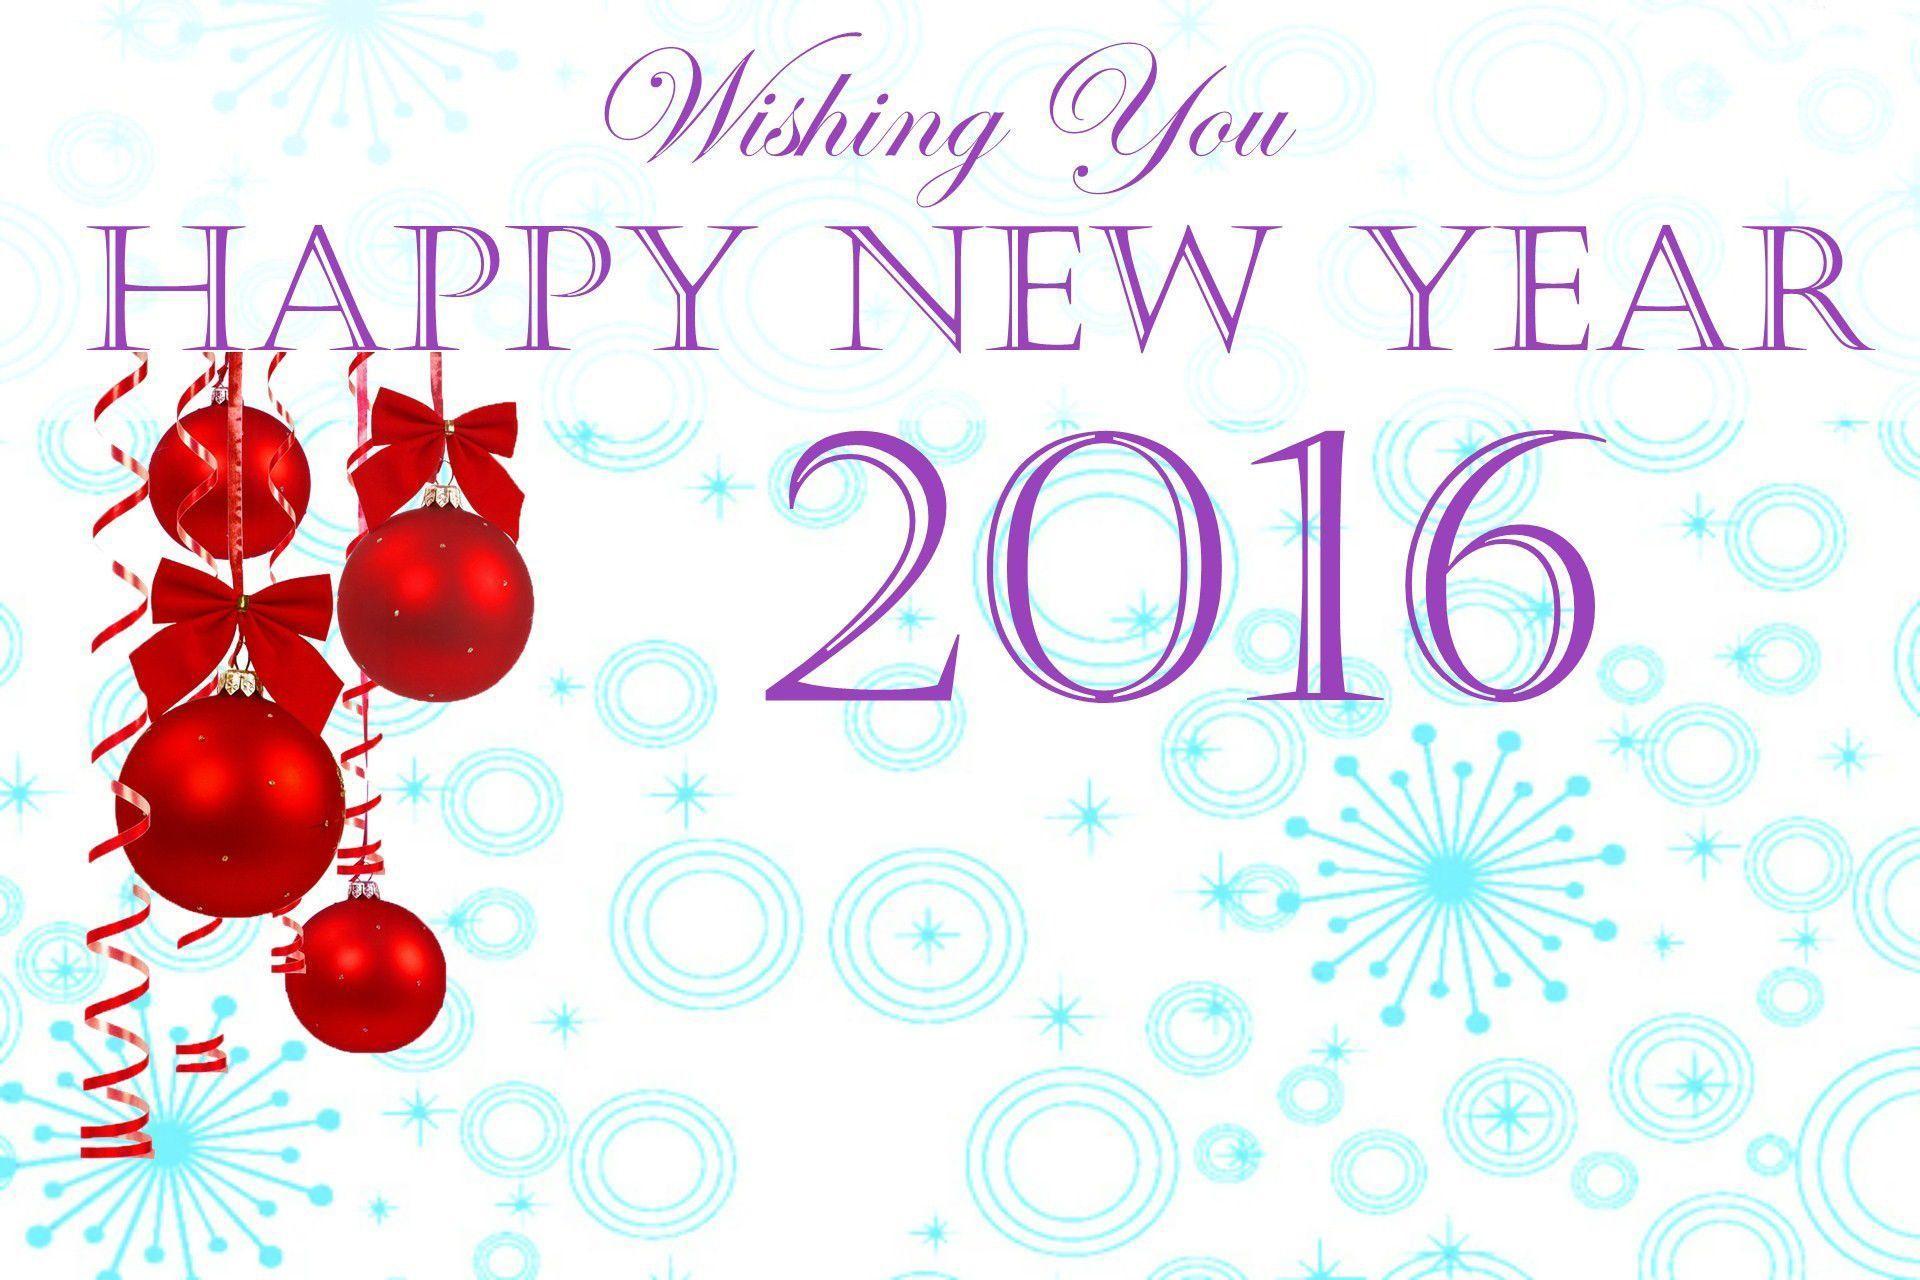 Happy New Year 2016 Free Download Wallpaper Picture With SMS